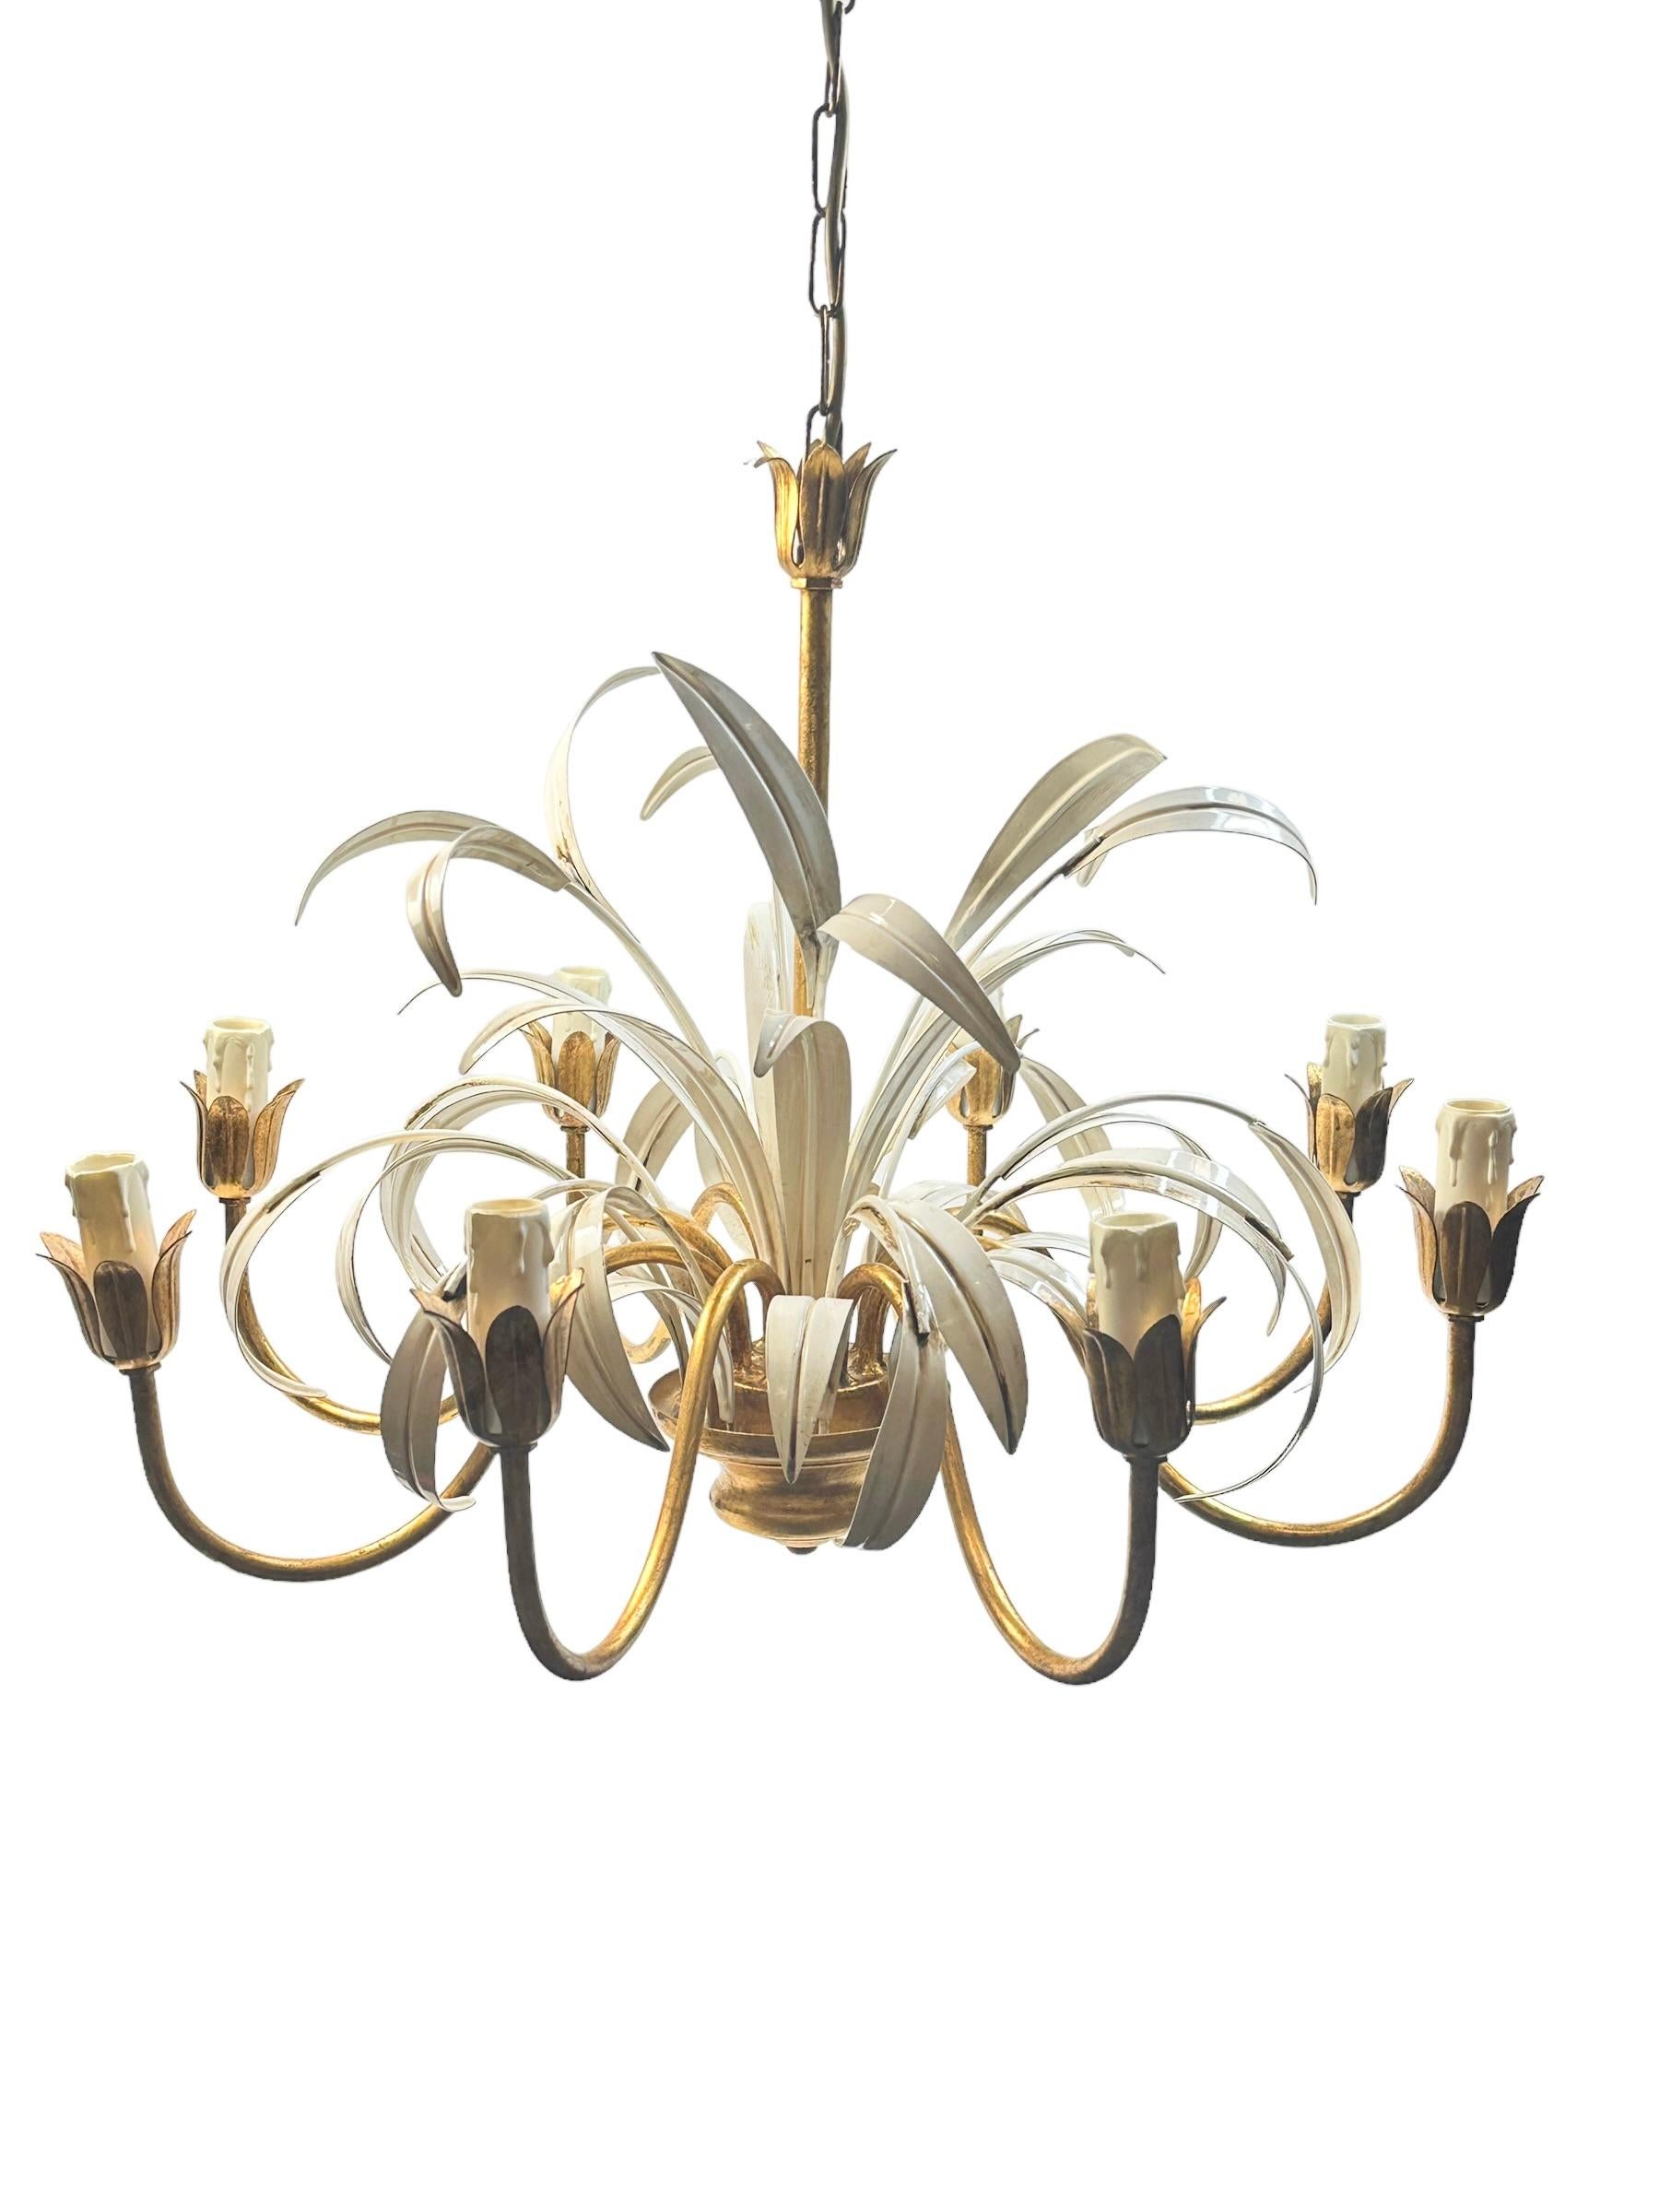 Gilt Italian Floral reed leaf eight-light chandelier Coco Chanel Hollywood Regency style, inspired by Coco Chanel. This tole pendant lamp has a warm antique gold finish which is enhanced by daylight or artificial light reflecting off its surface.